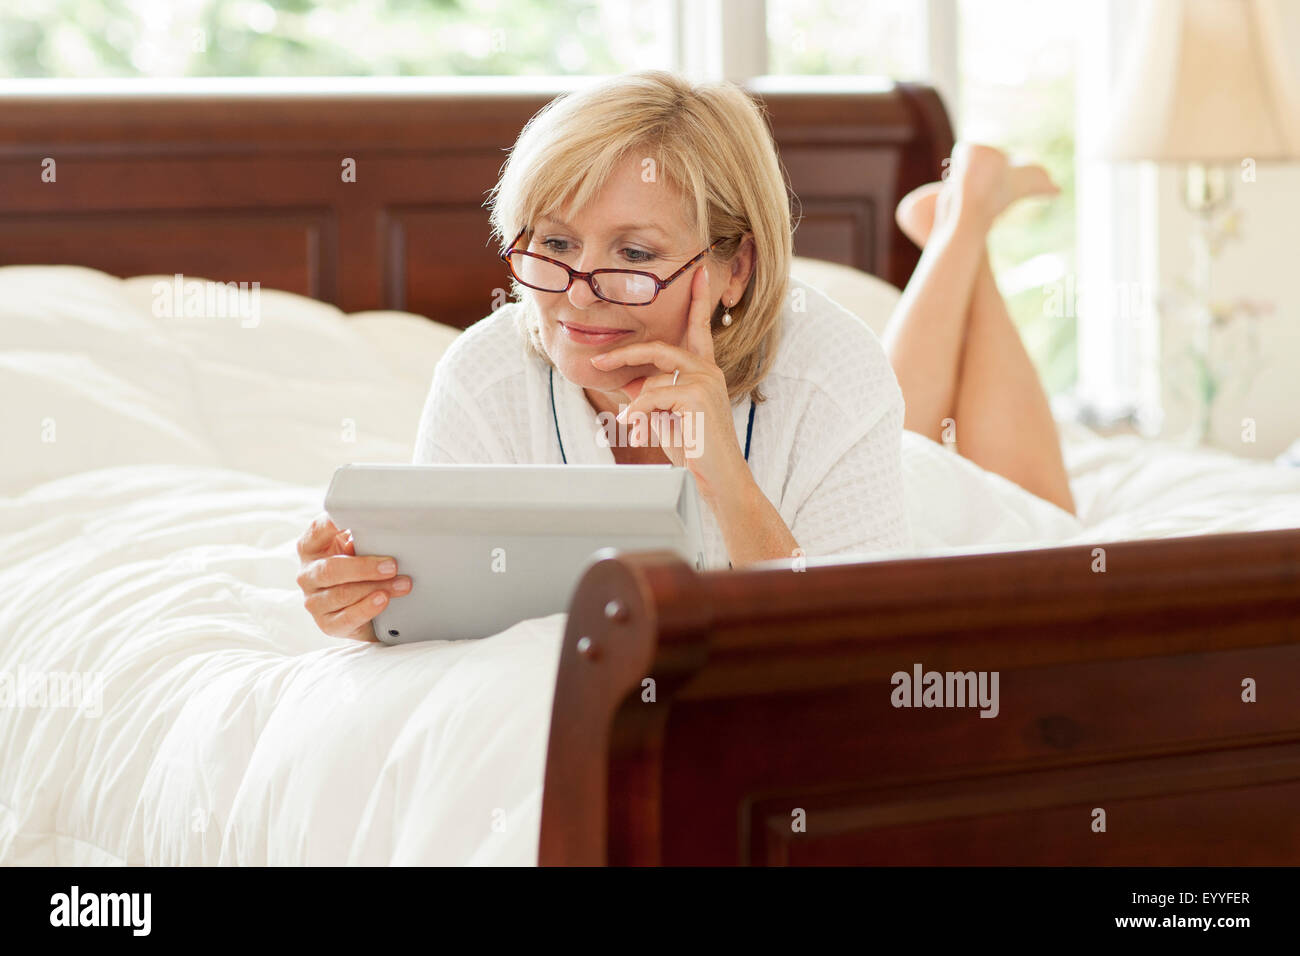 Caucasian woman using digital tablet on bed Stock Photo